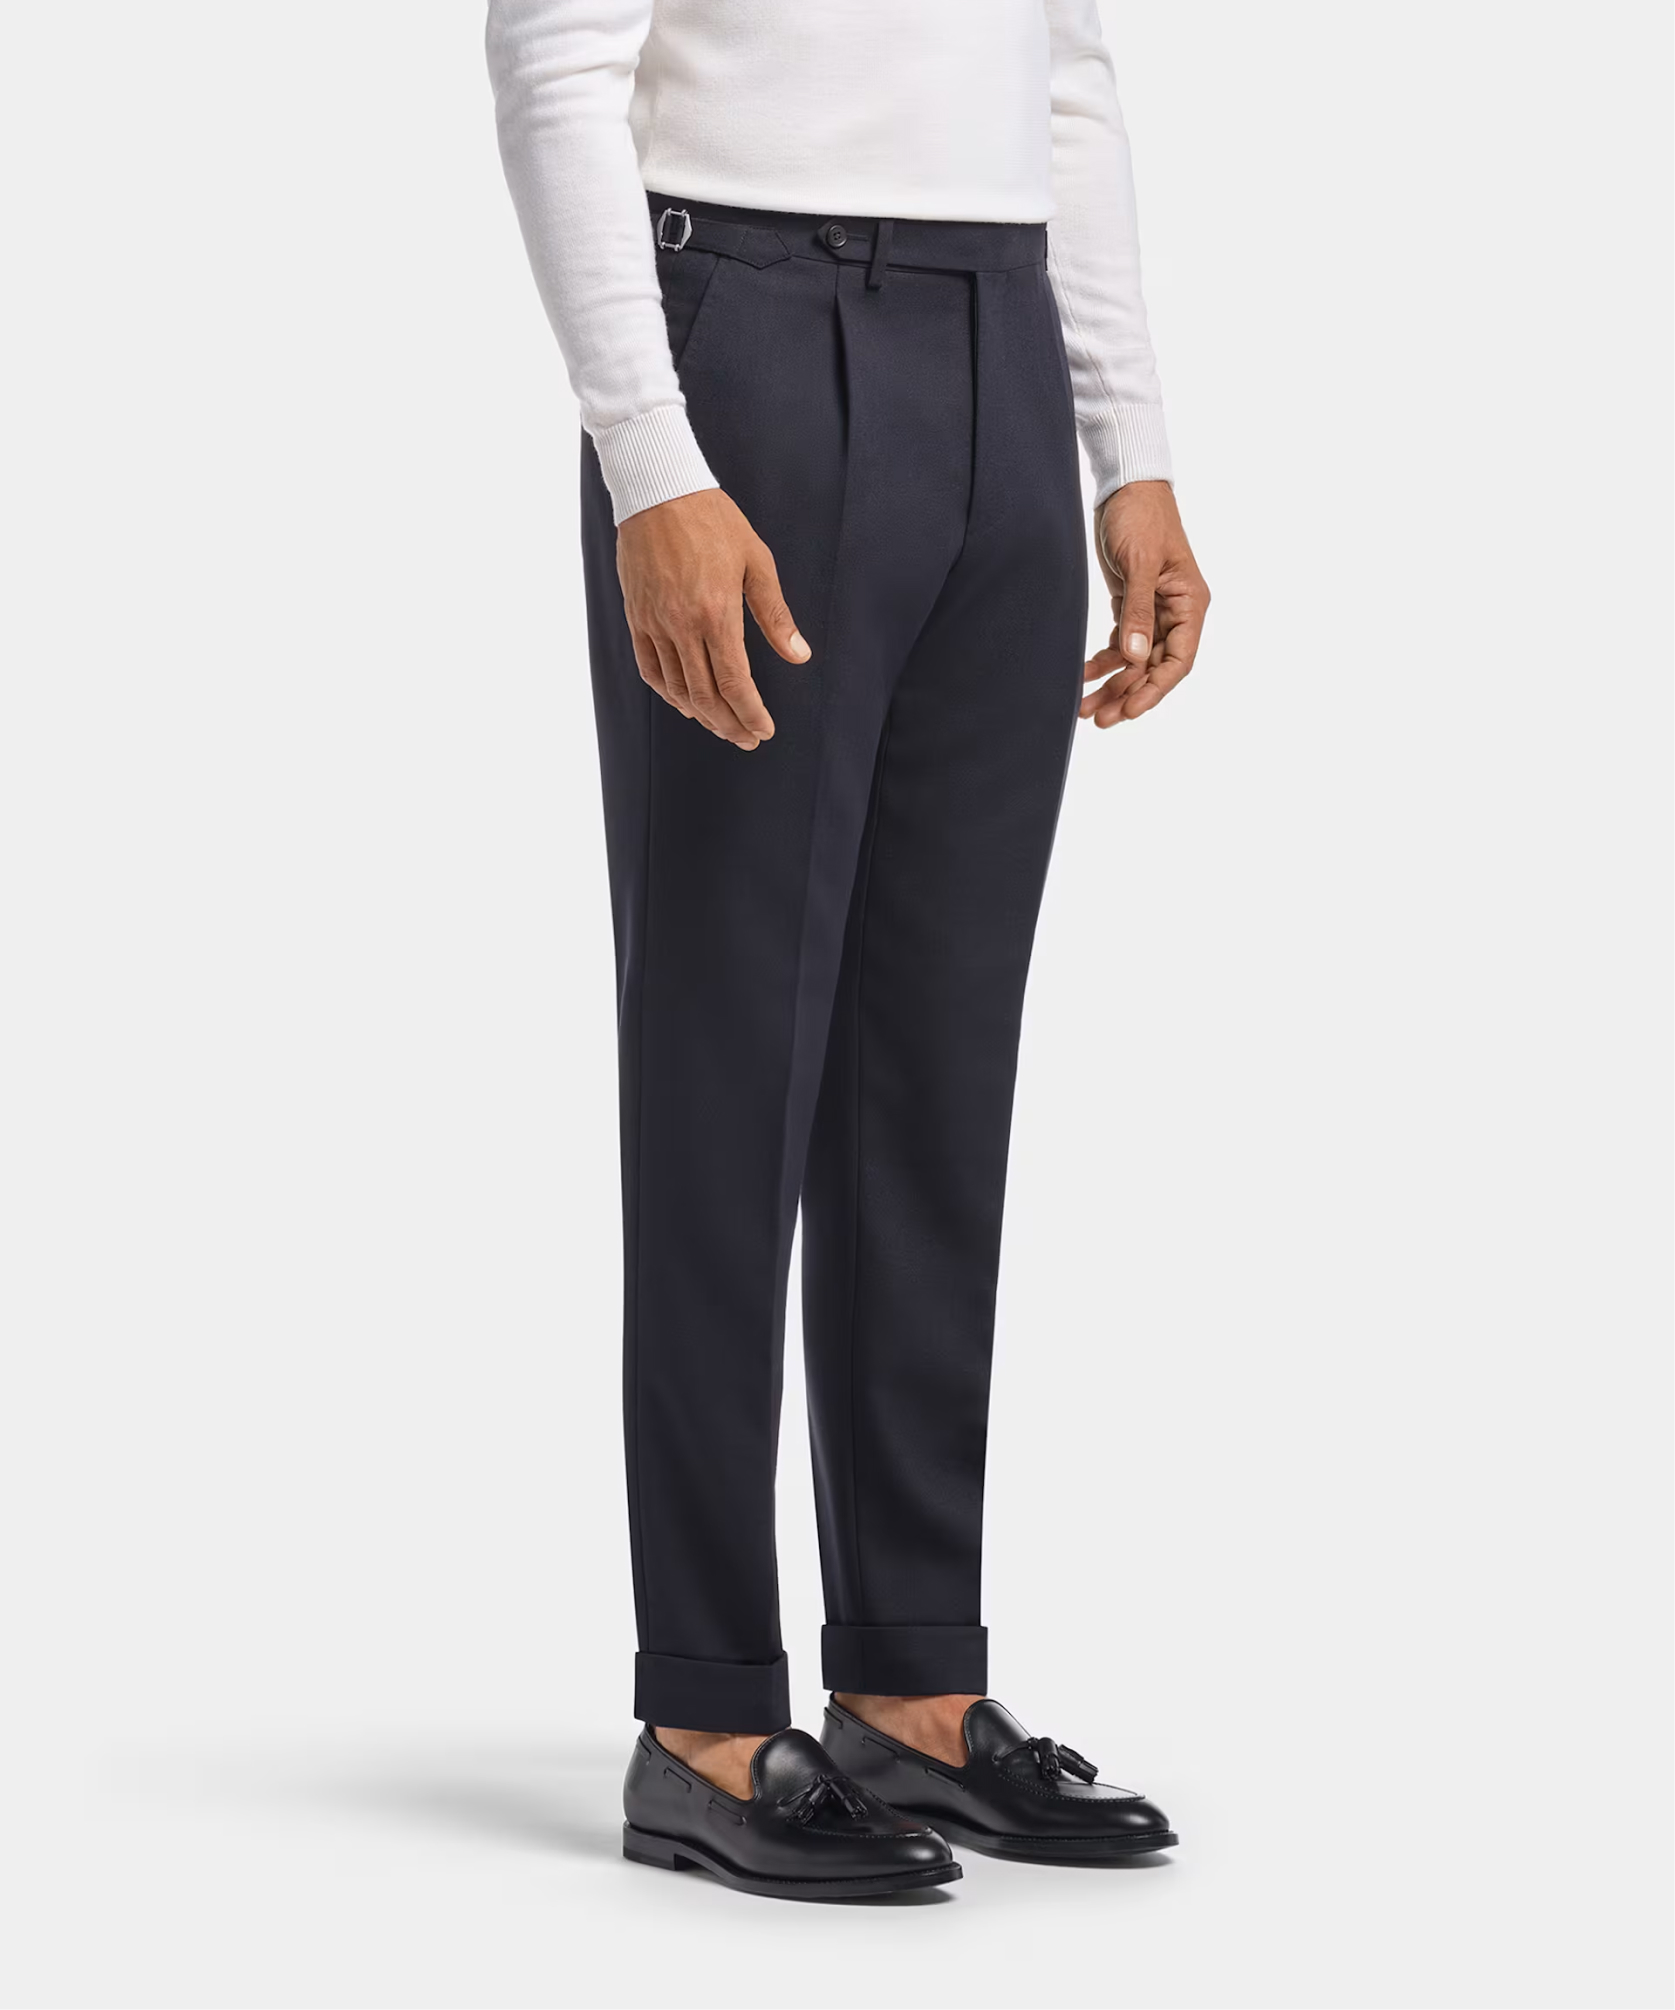 Fit Guide Trousers